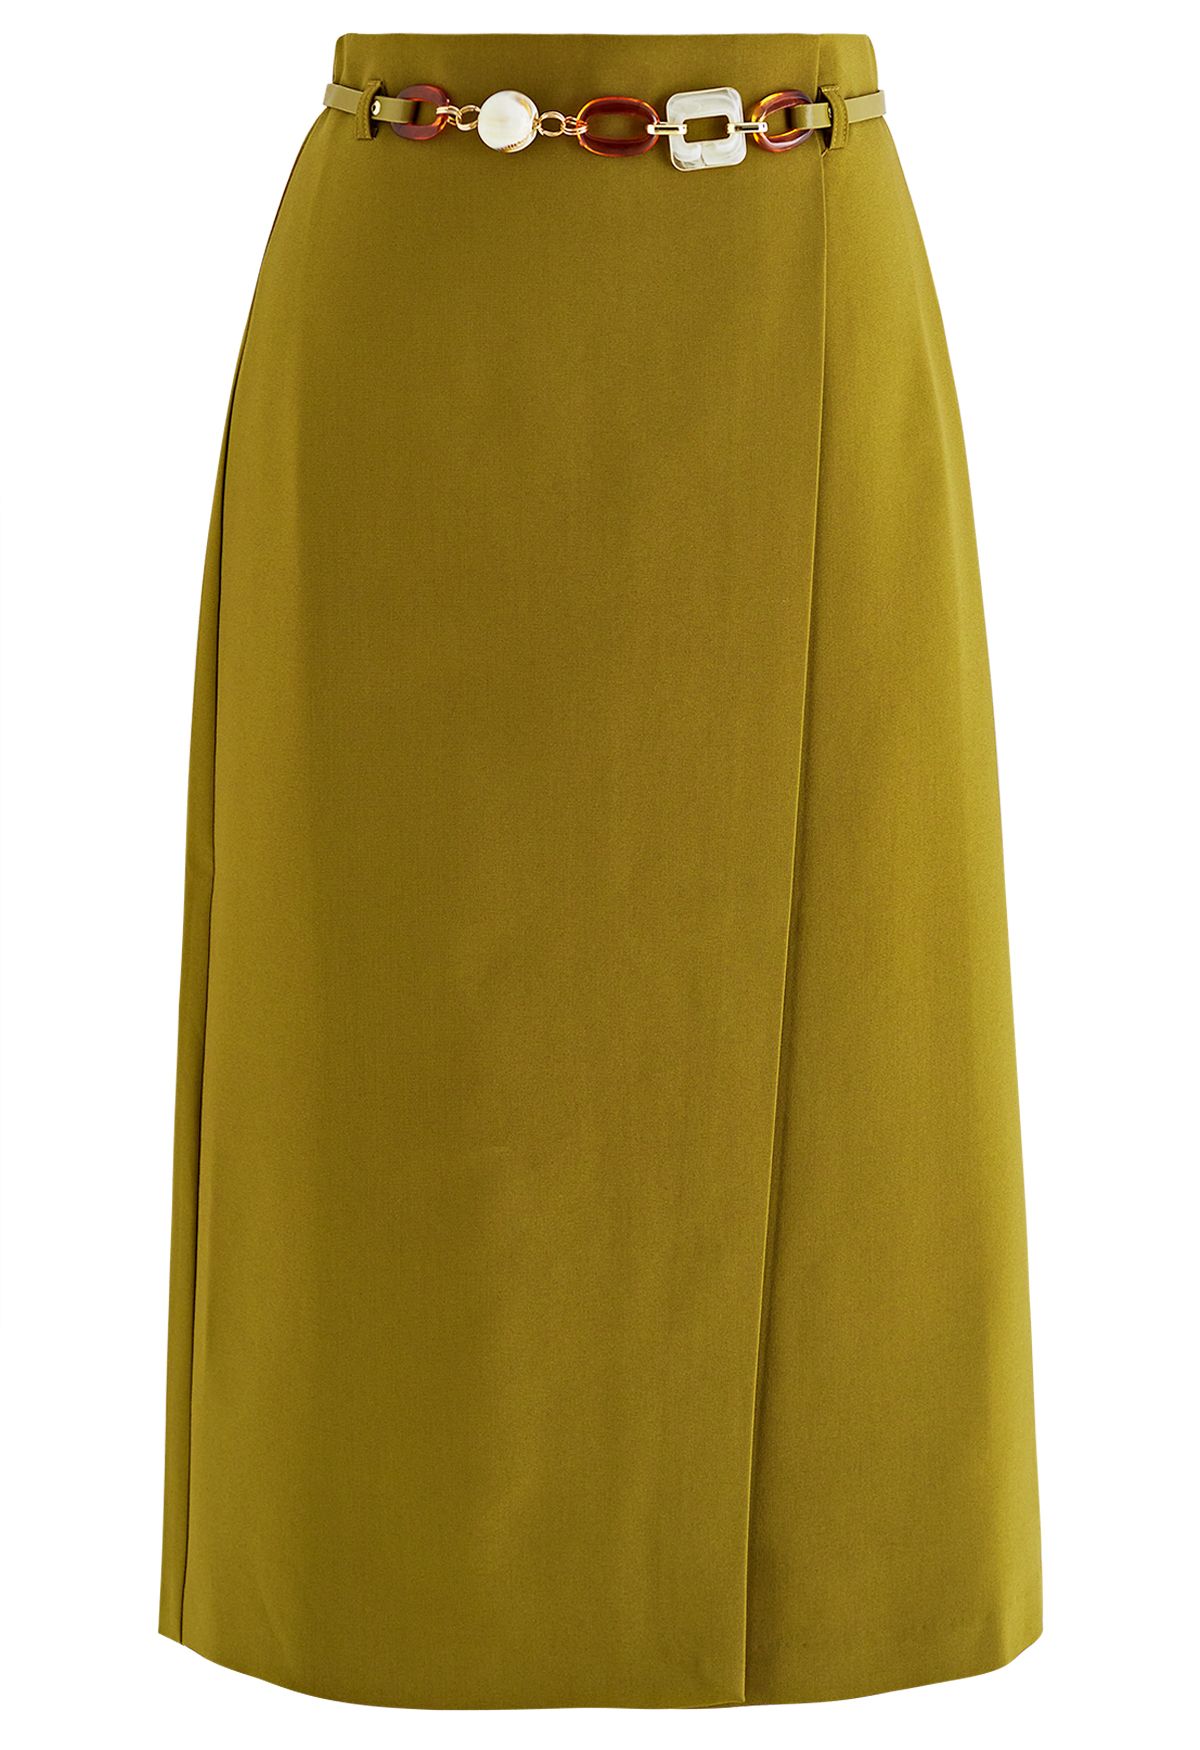 Flap Front Belted Midi Skirt in Mustard